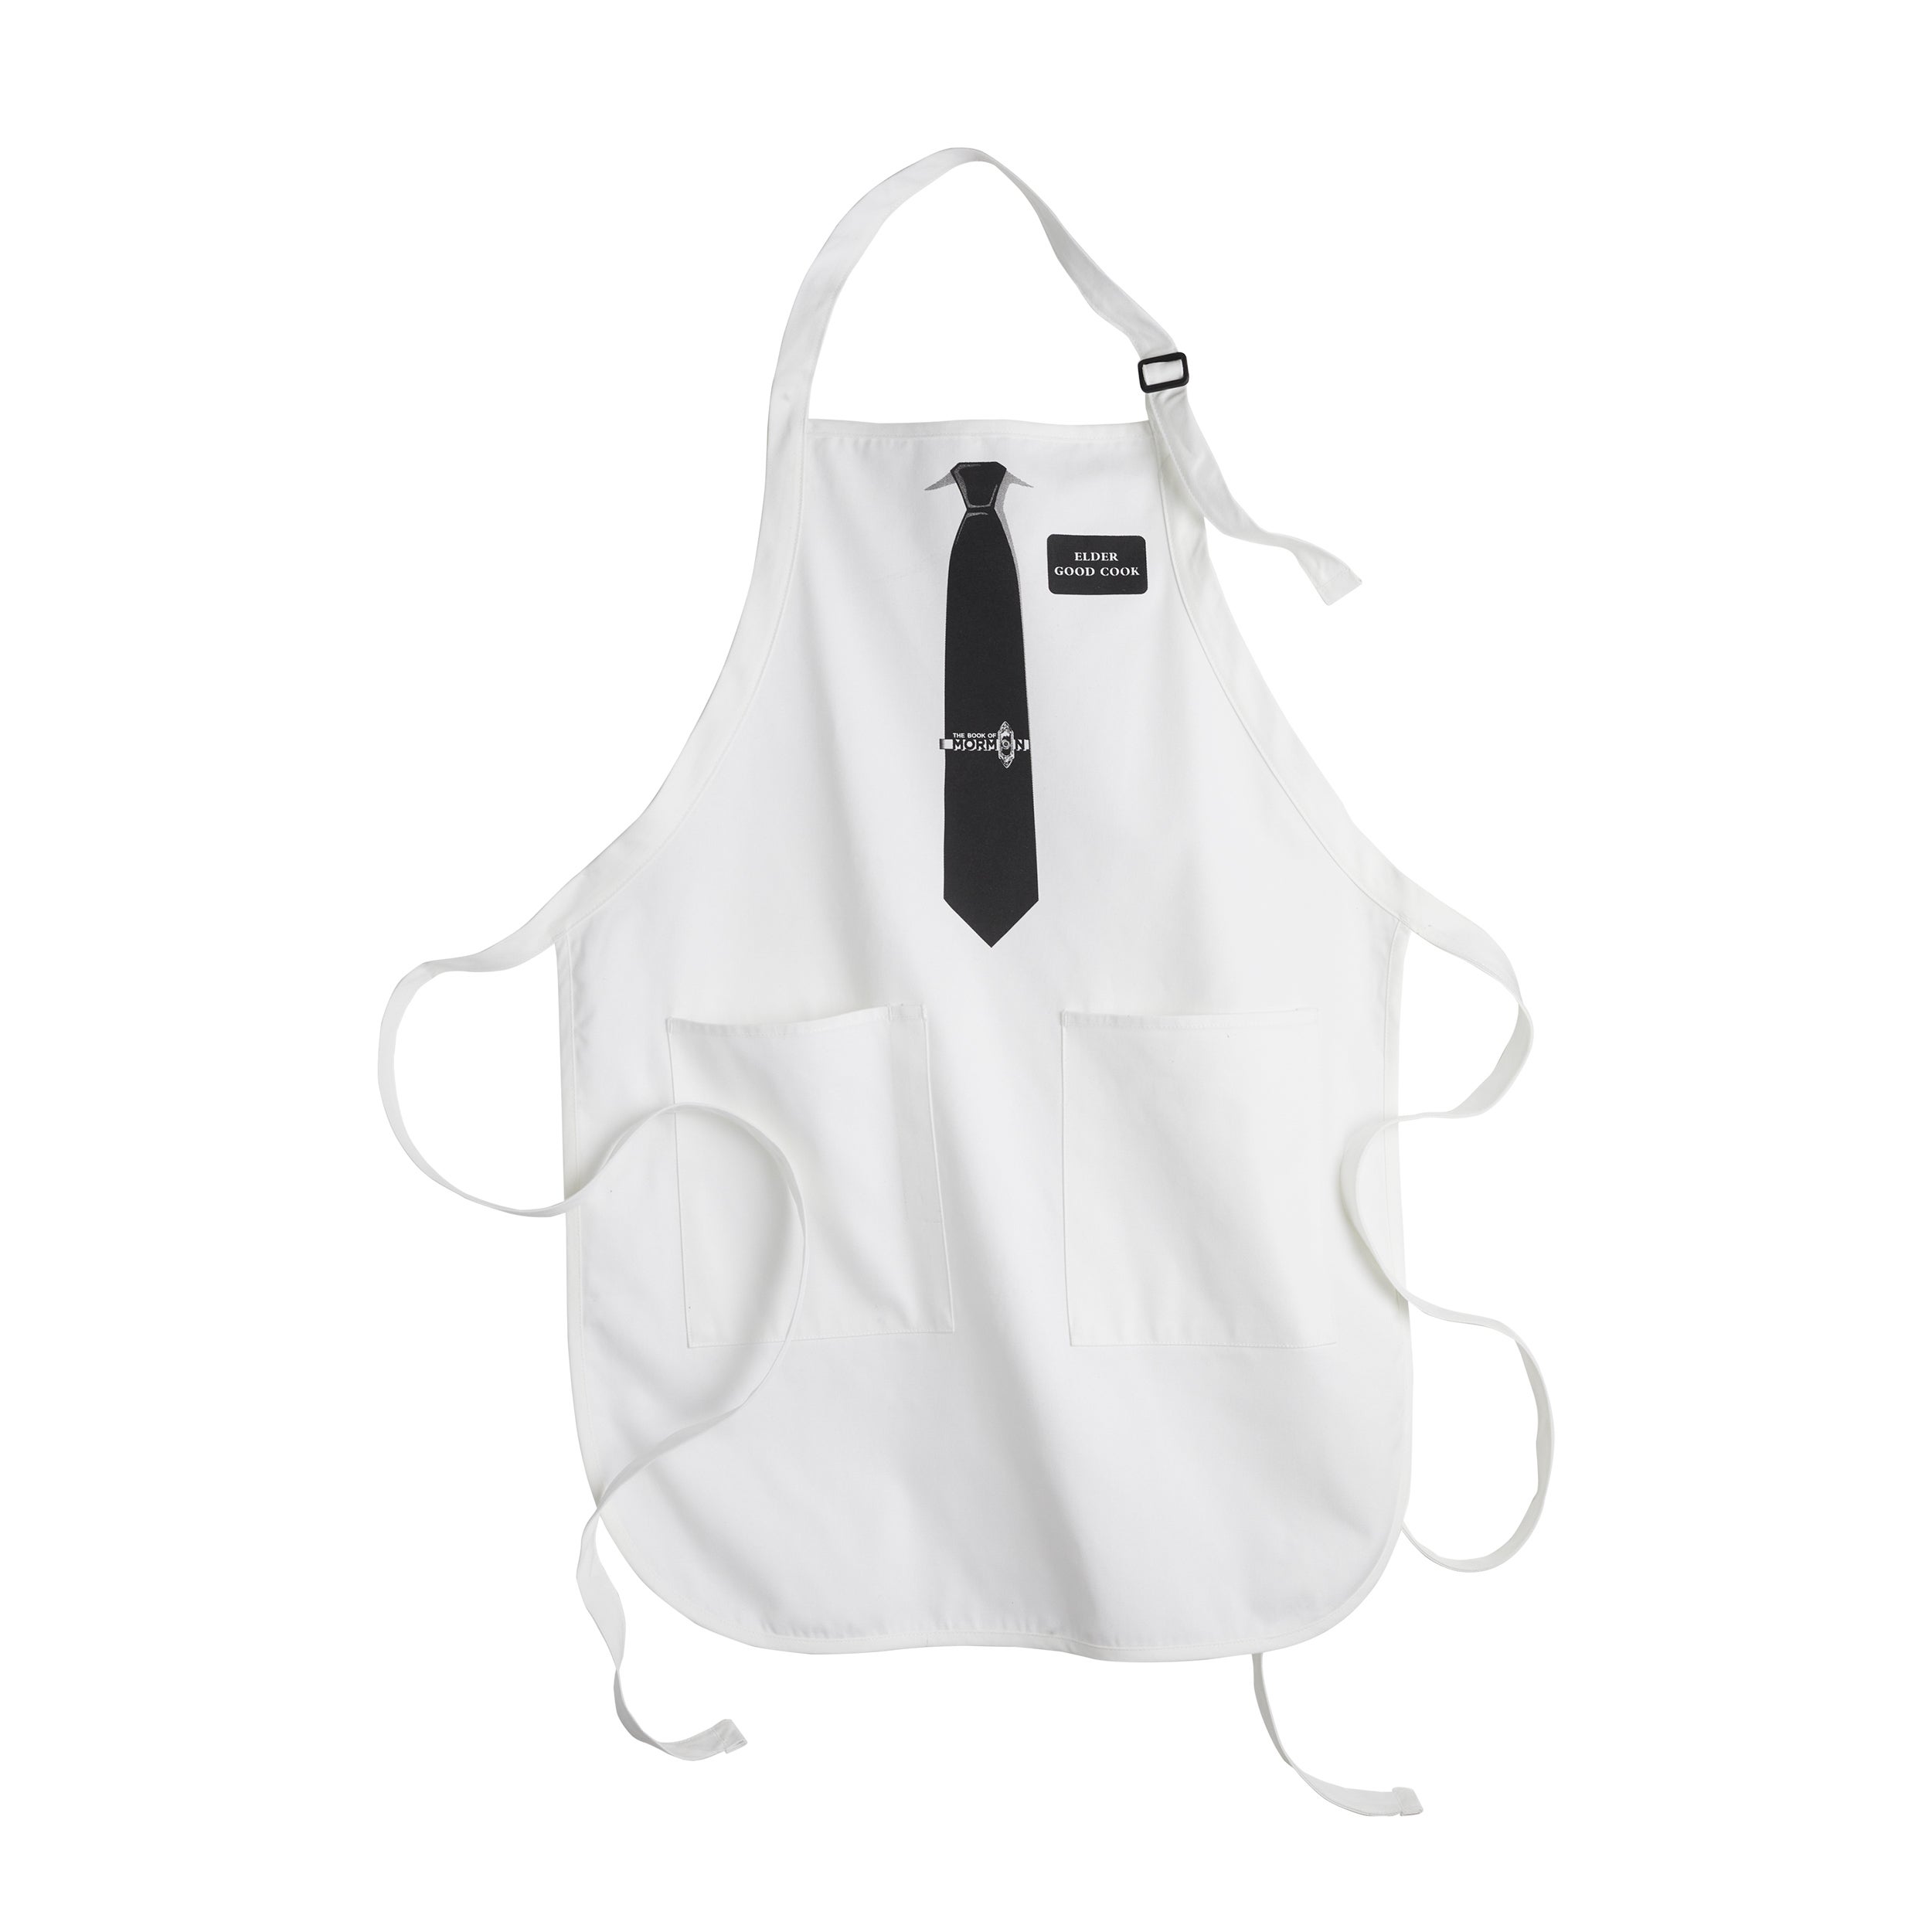 THE BOOK OF MORMON APRON | Broadway Cares Online Store